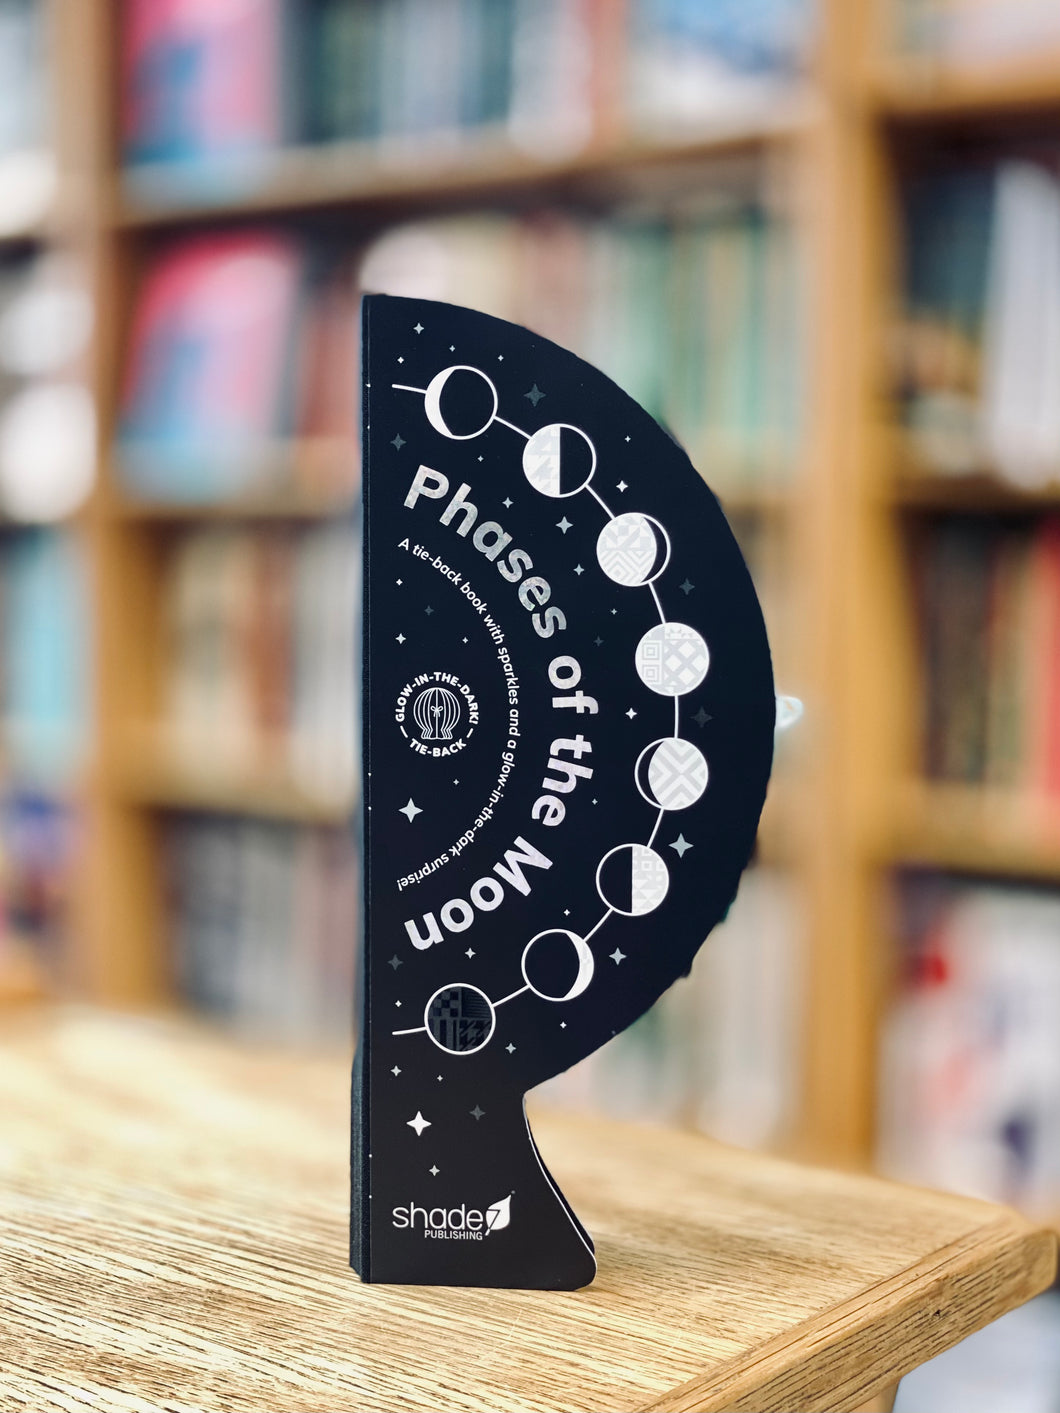 PHASES OF THE MOON – A TIE-BACK, GLOW-IN-THE-DARK BOOK